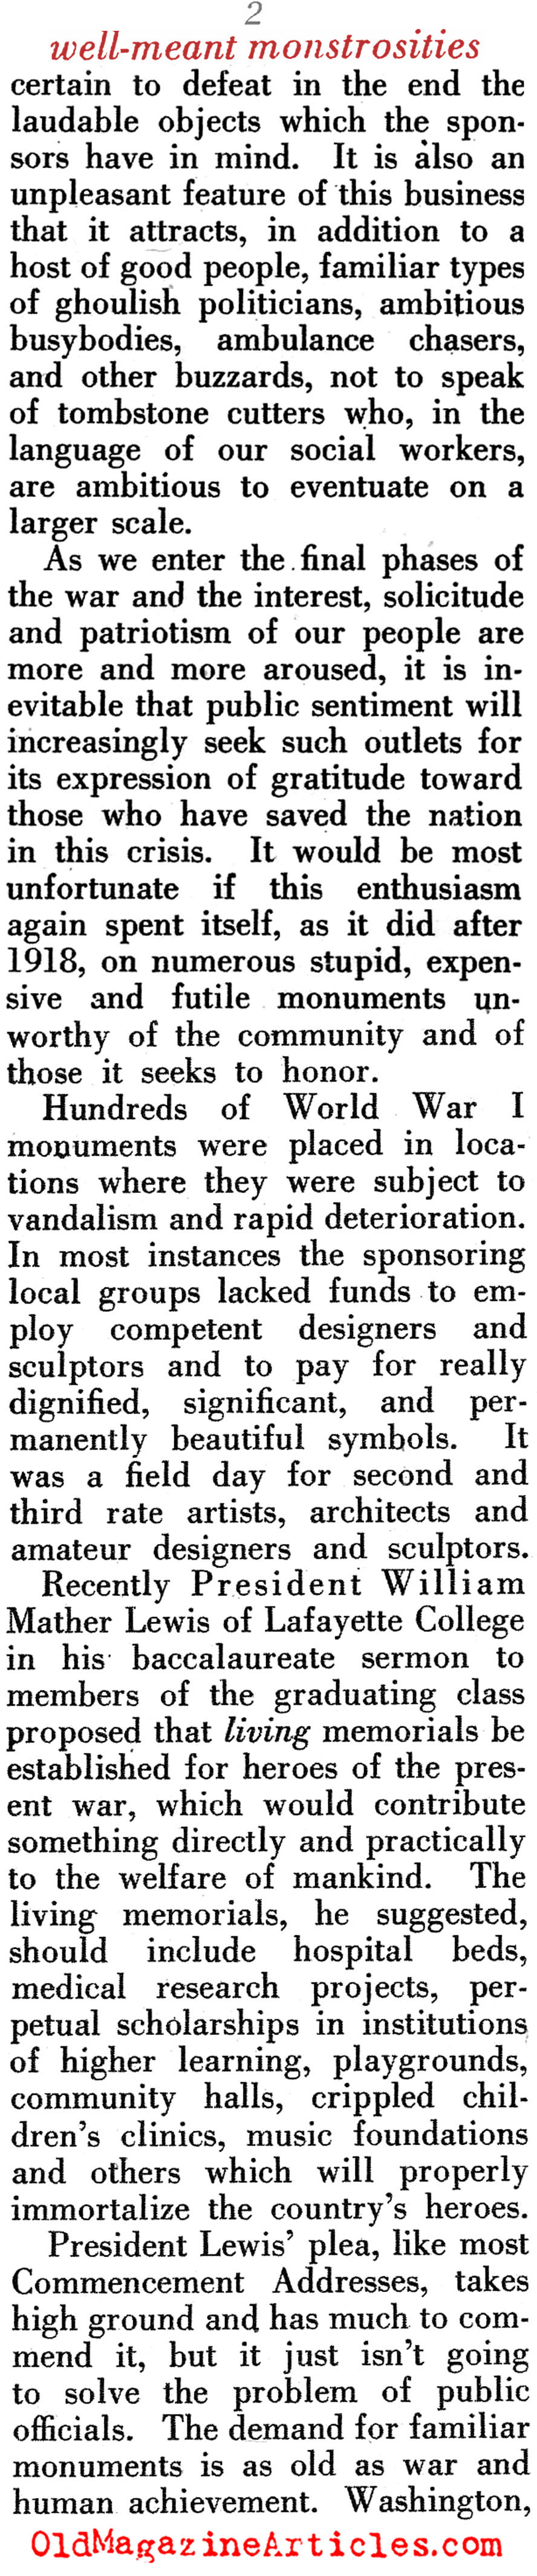 War Memorials Don't Have to be Ugly (Pageant Magazine, 1944)